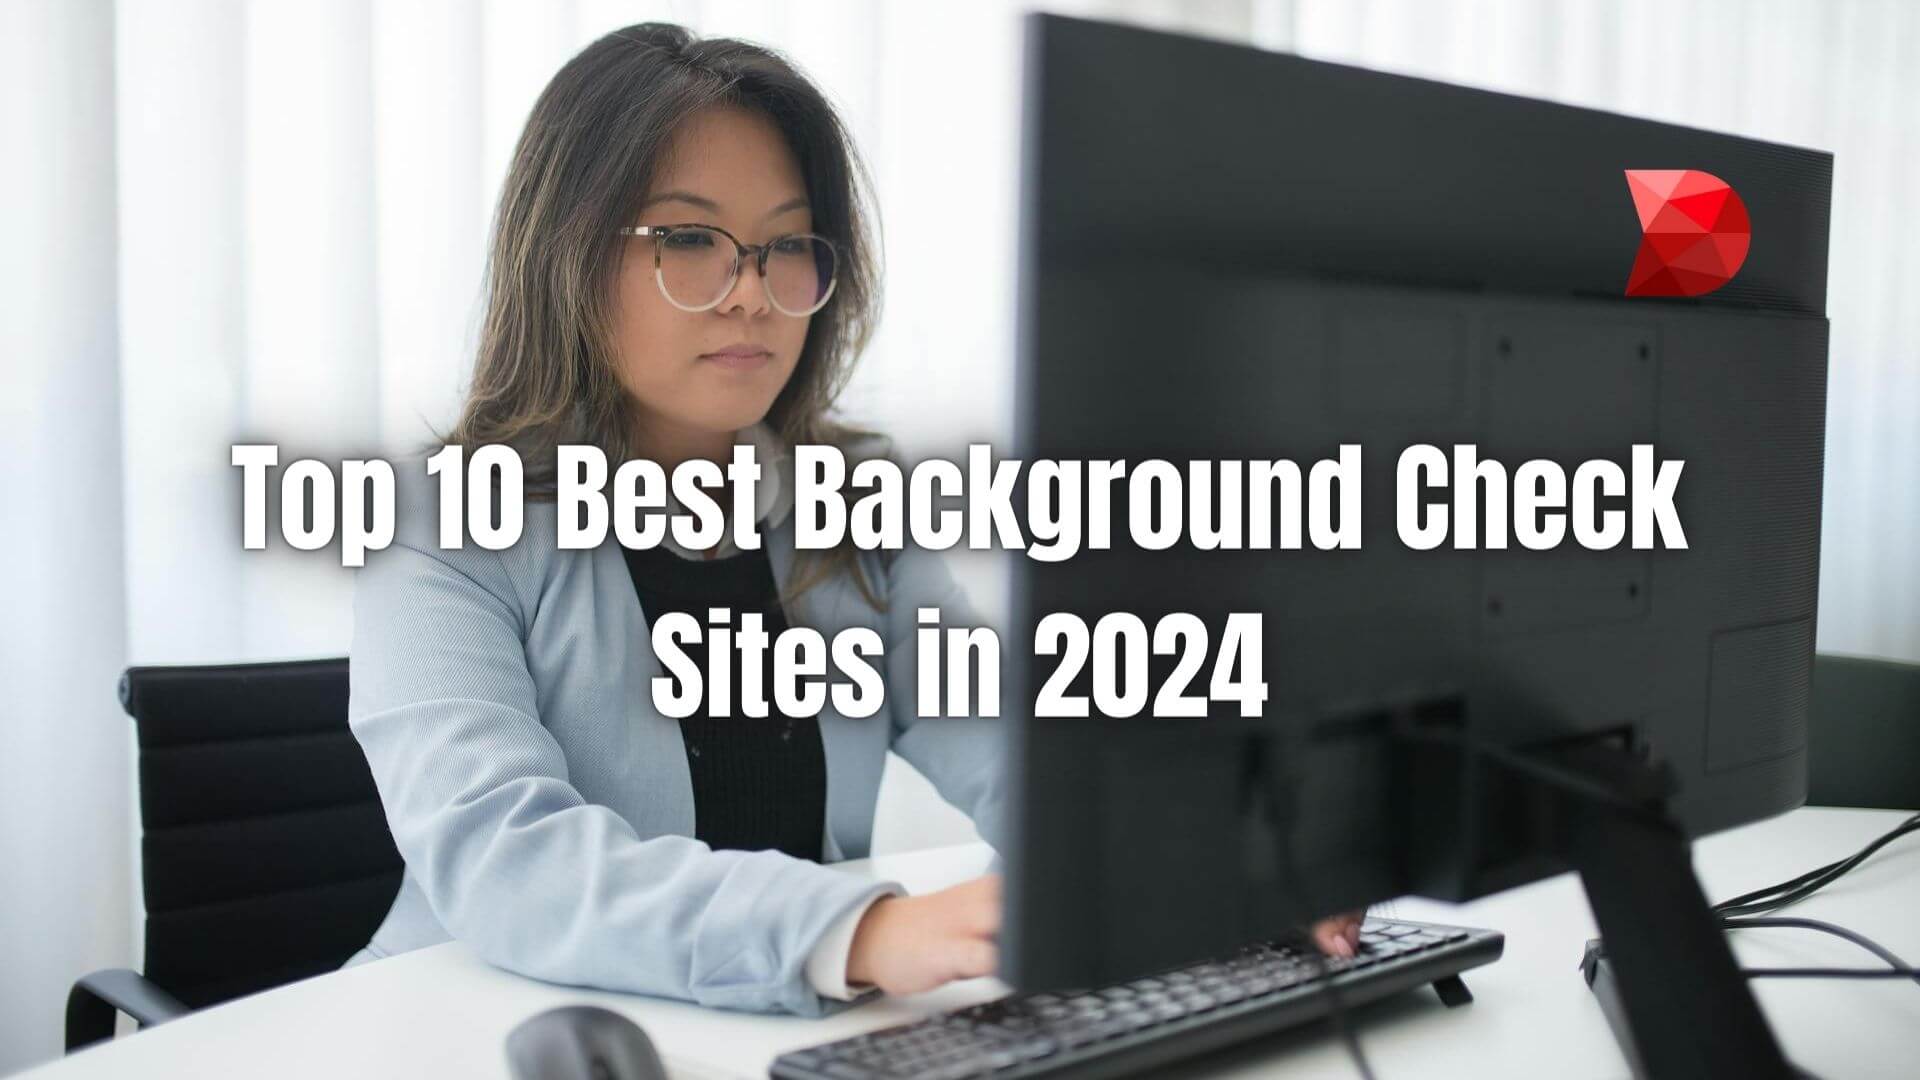 Find the perfect background check site in 2024 with our detailed comparison. Explore the top 10 options for accurate and efficient results.